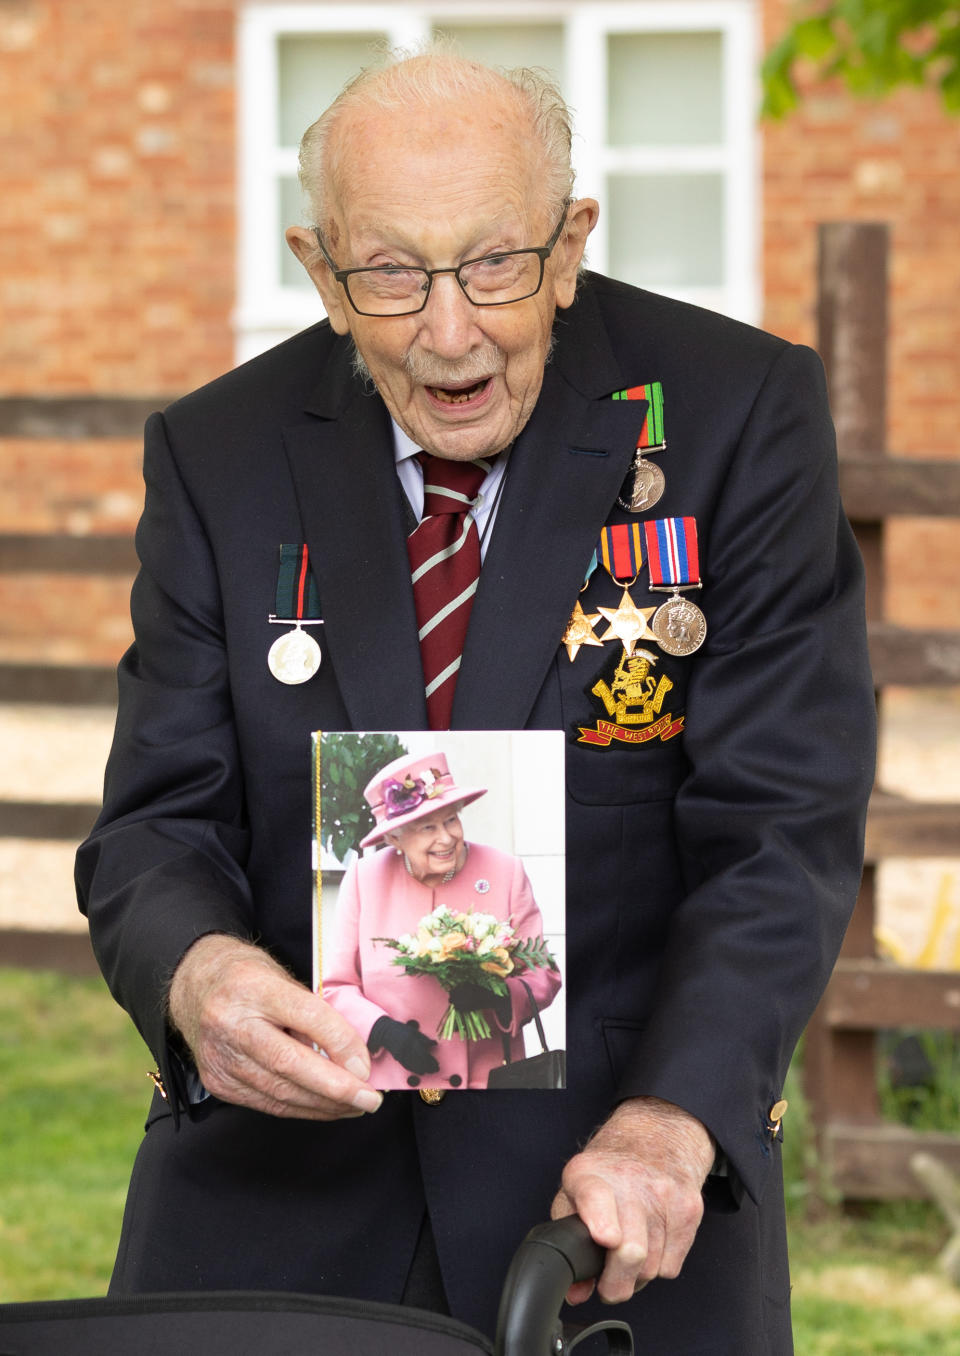 Handout photo of Second World War veteran Captain Tom Moore holding a birthday card from Queen Elizabeth II as he celebrates his 100th birthday.